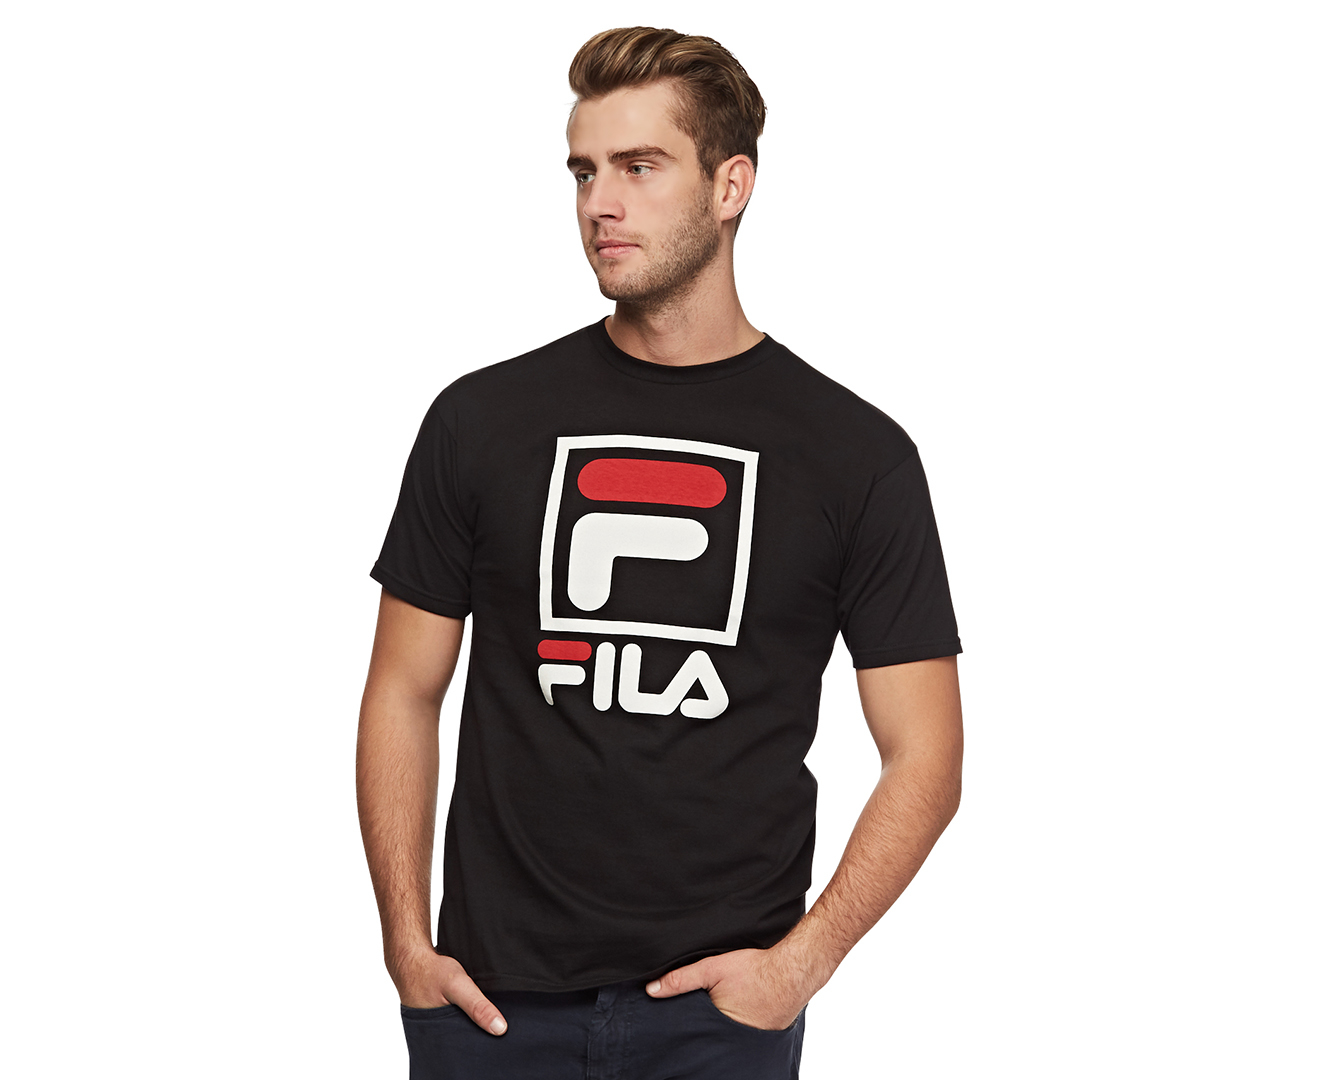 Fila Men's Stacked Tee - Black/White/Red | Catch.co.nz